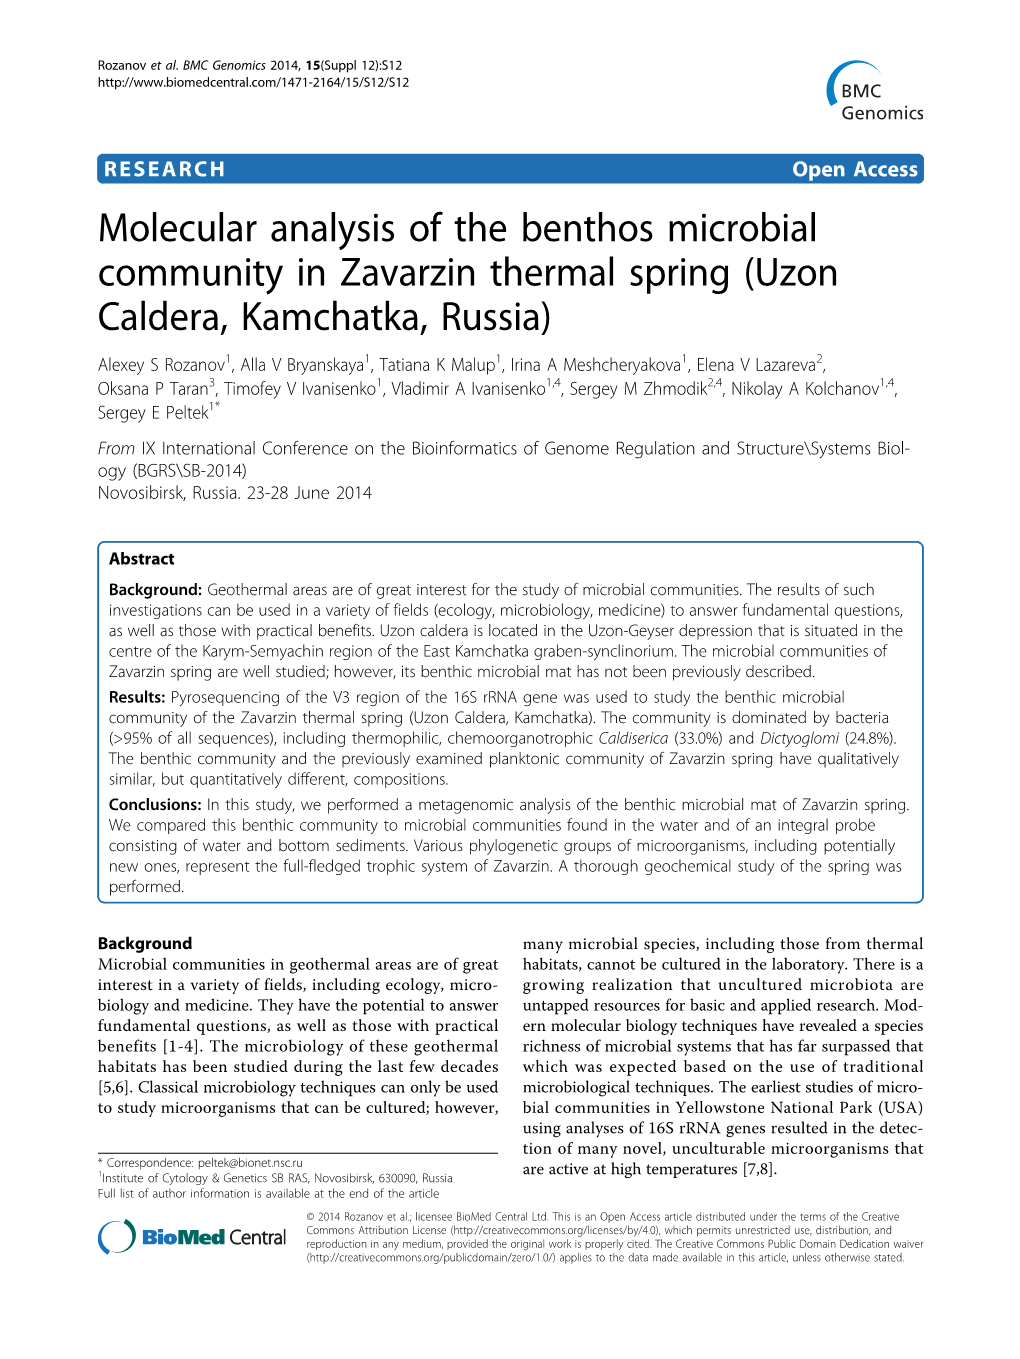 Molecular Analysis of the Benthos Microbial